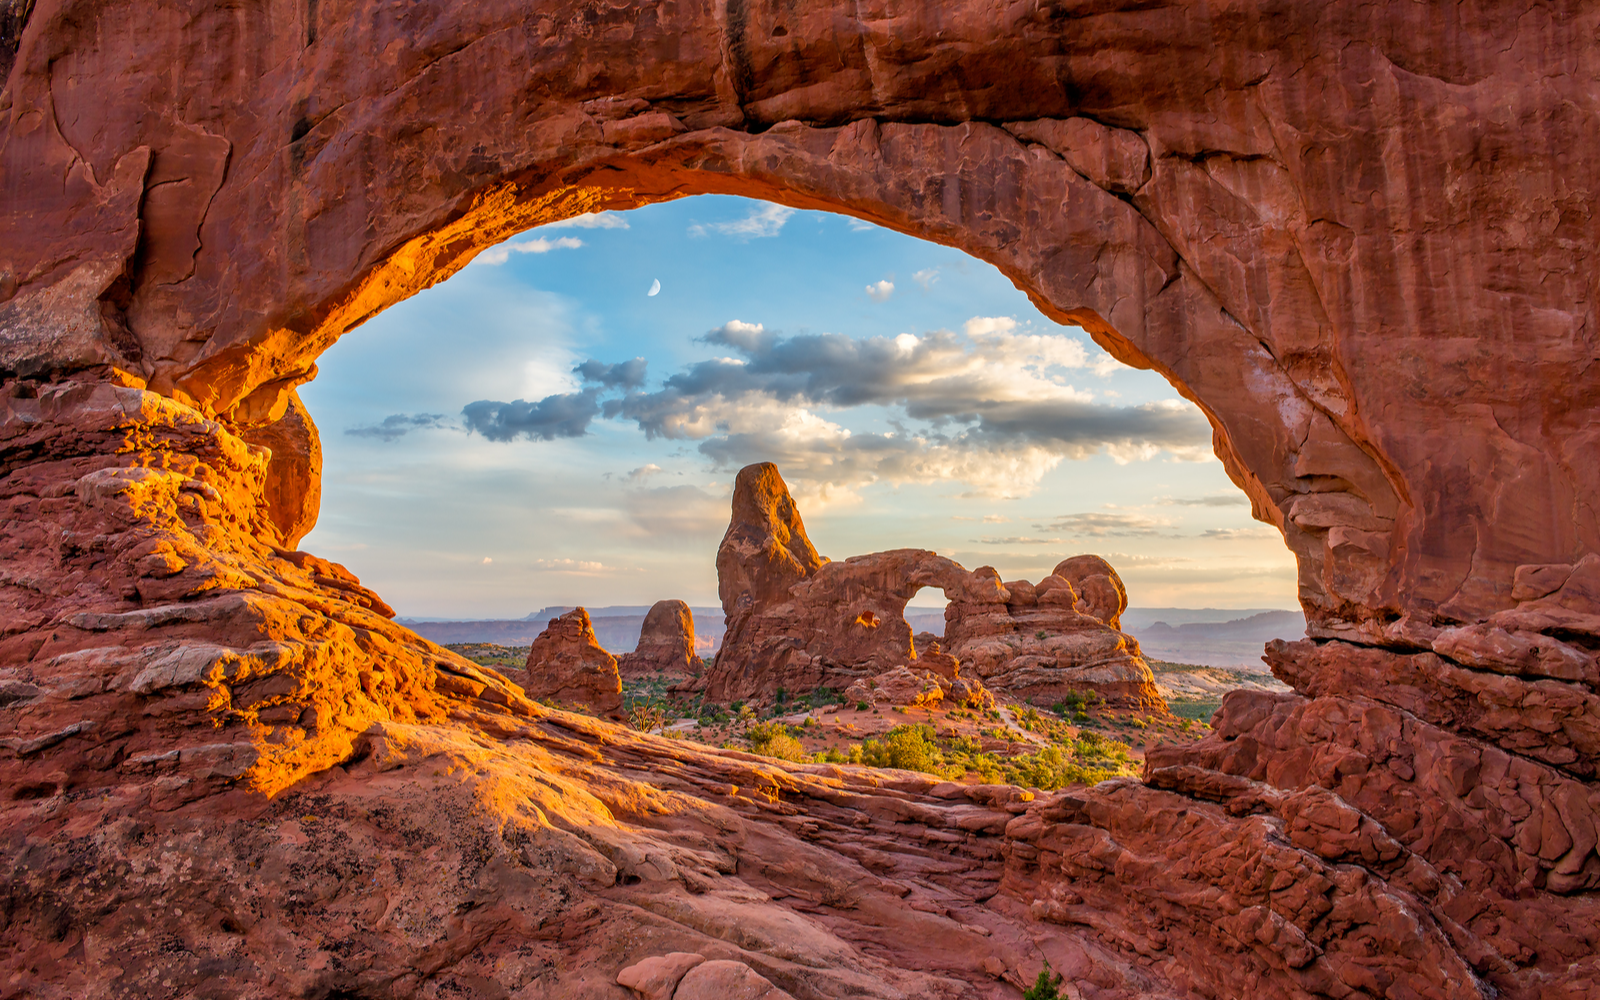 Cool view of the Arches at one of the best places to visit in Utah as viewed from a cave